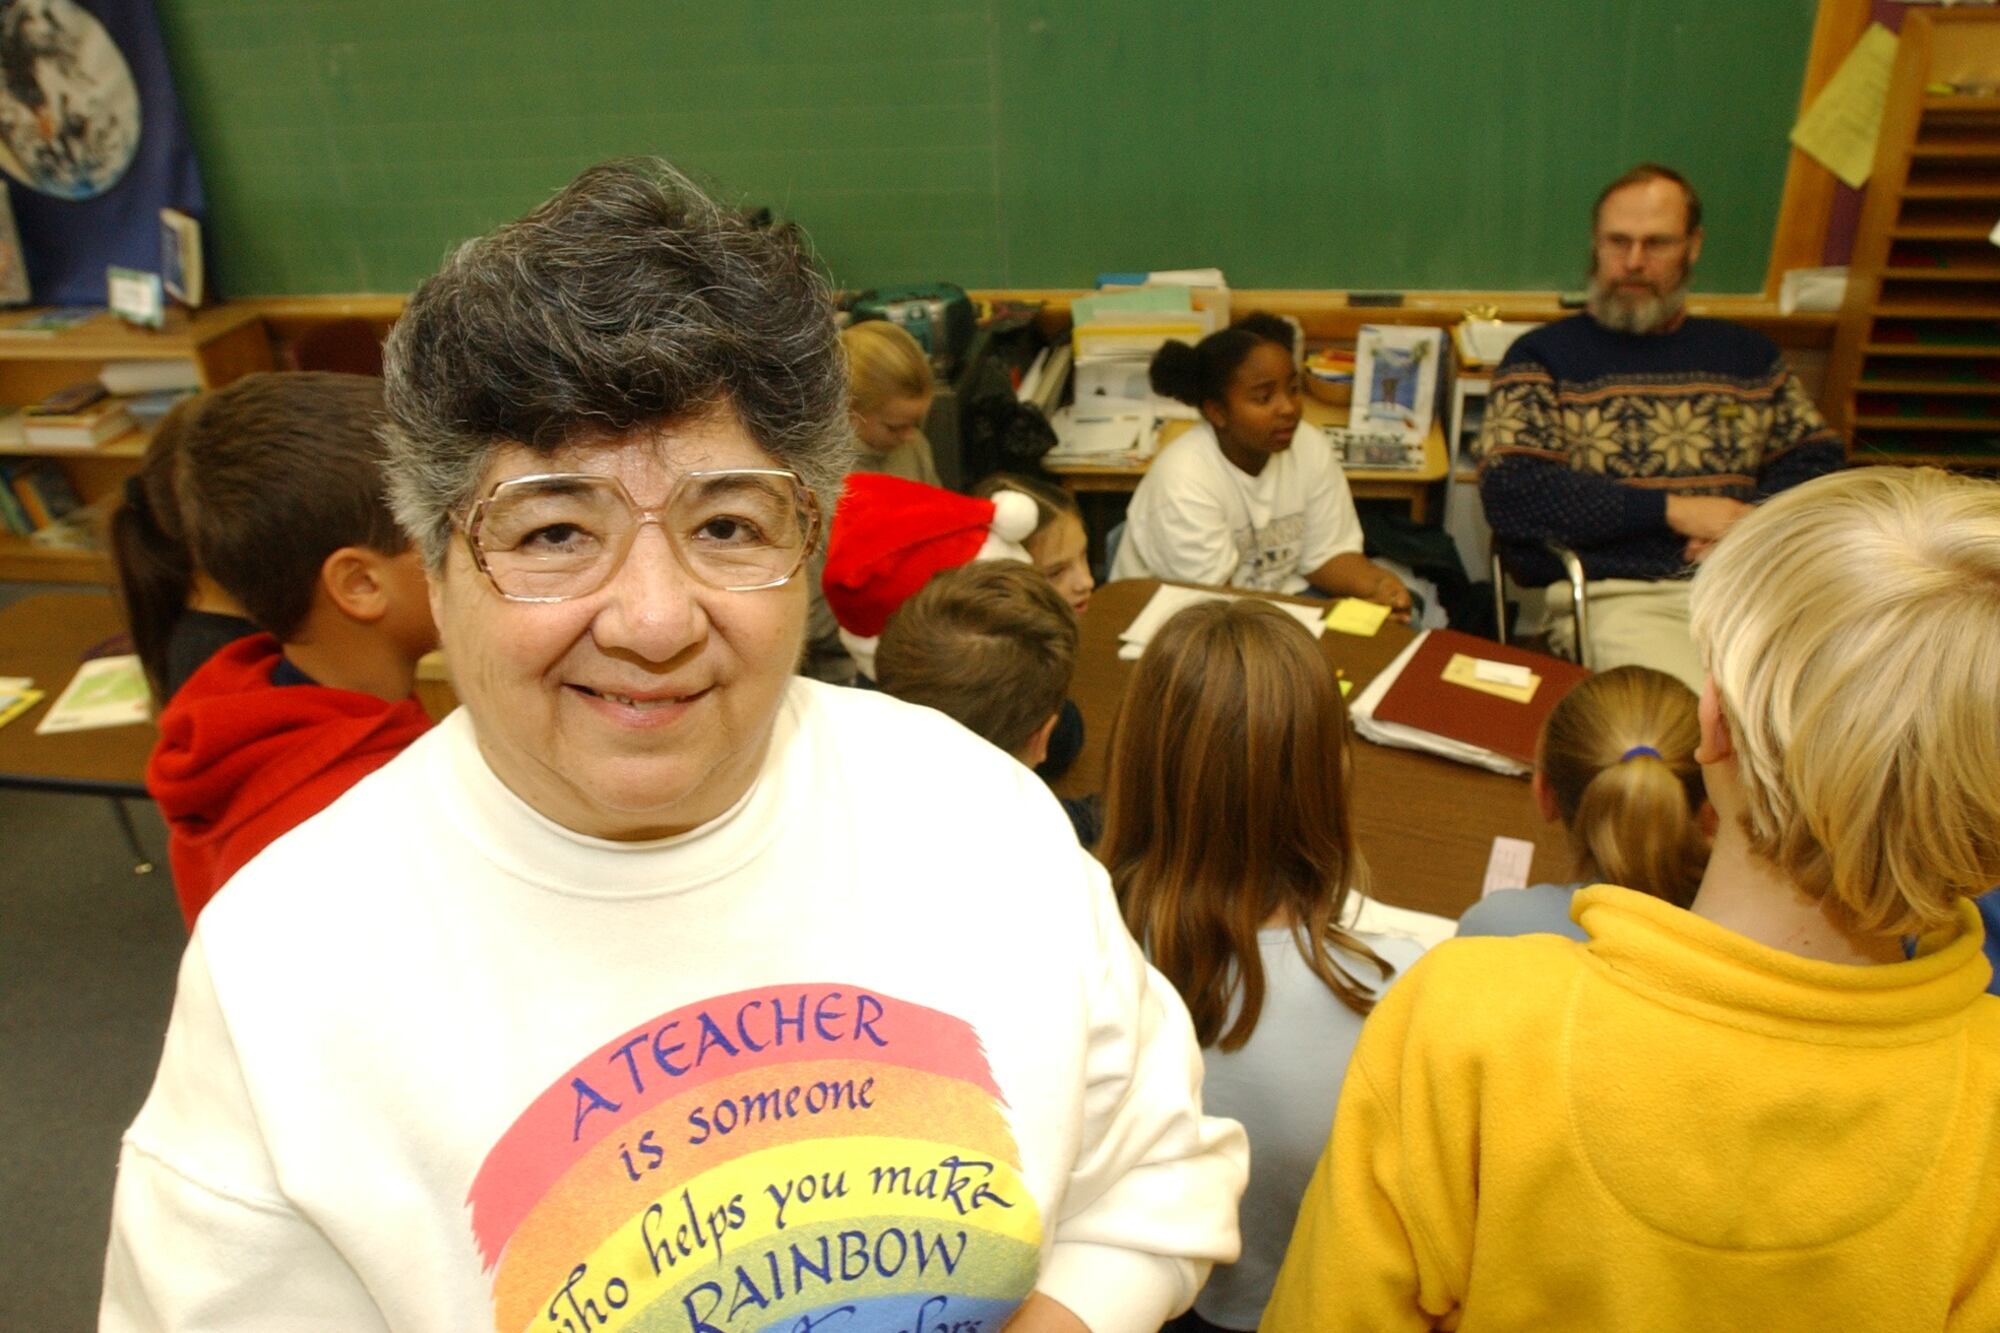 A woman in glasses and a sweatshirt smiles in a classroom. Students can be seen in the background.